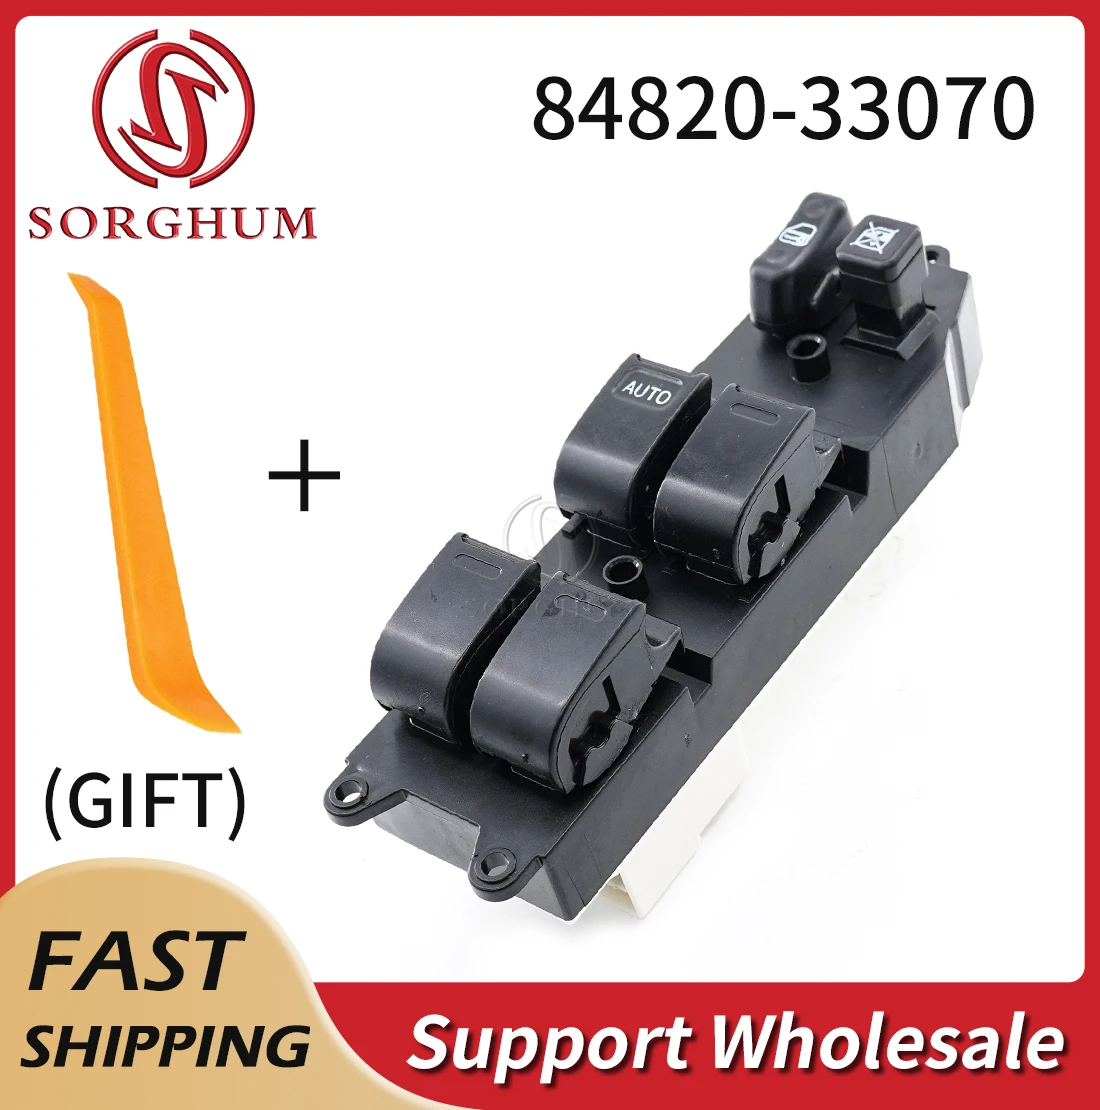 

Sorghum 84820-33070 Car Auto Front Left Electric Power Window Master Switch Button For Toyota Prius 2004-2009 Camry MCV20 SXV20